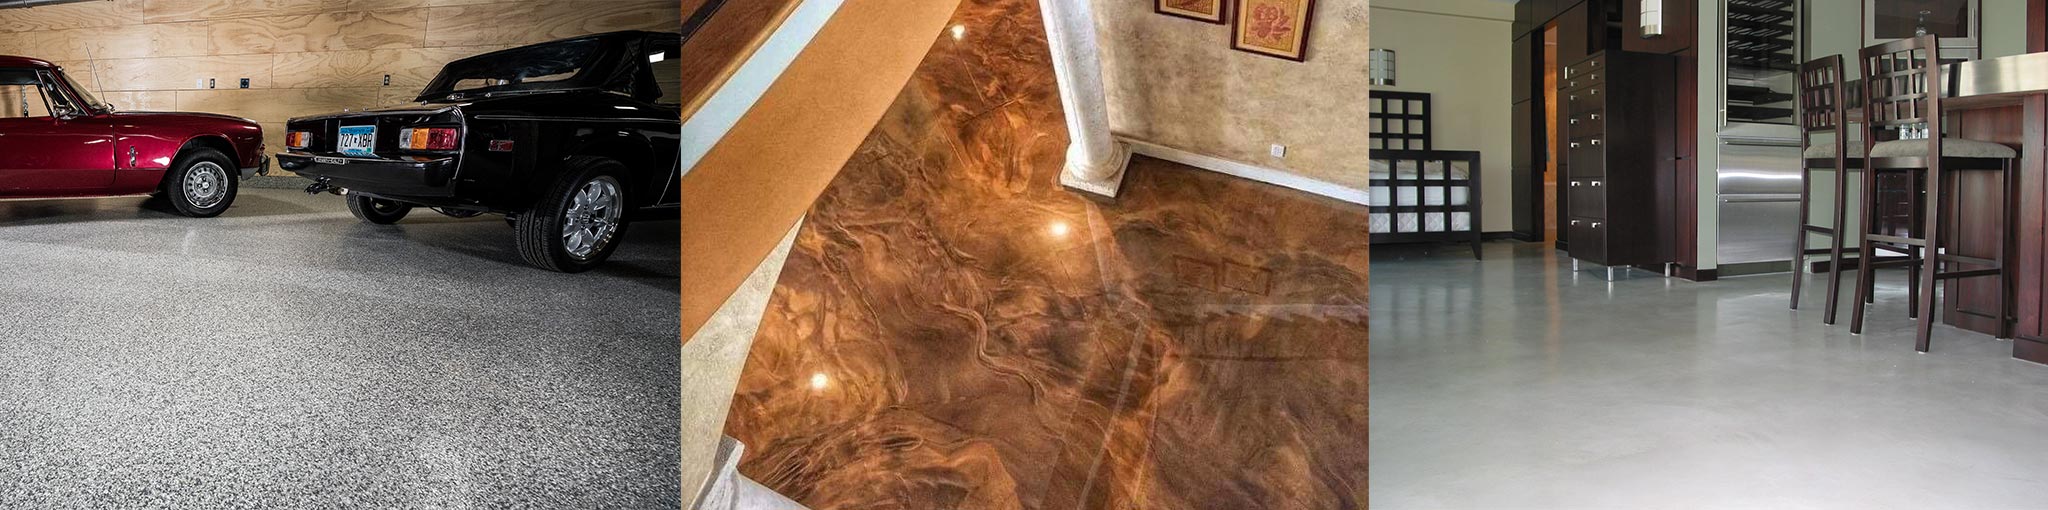 DIY Residential Concrete Floor Kits Garage Kitchen Entrance all living areas DIY Residential Flooring | Metallic Epoxy| Polished Concrete | Duraamen Engineered Products Inc